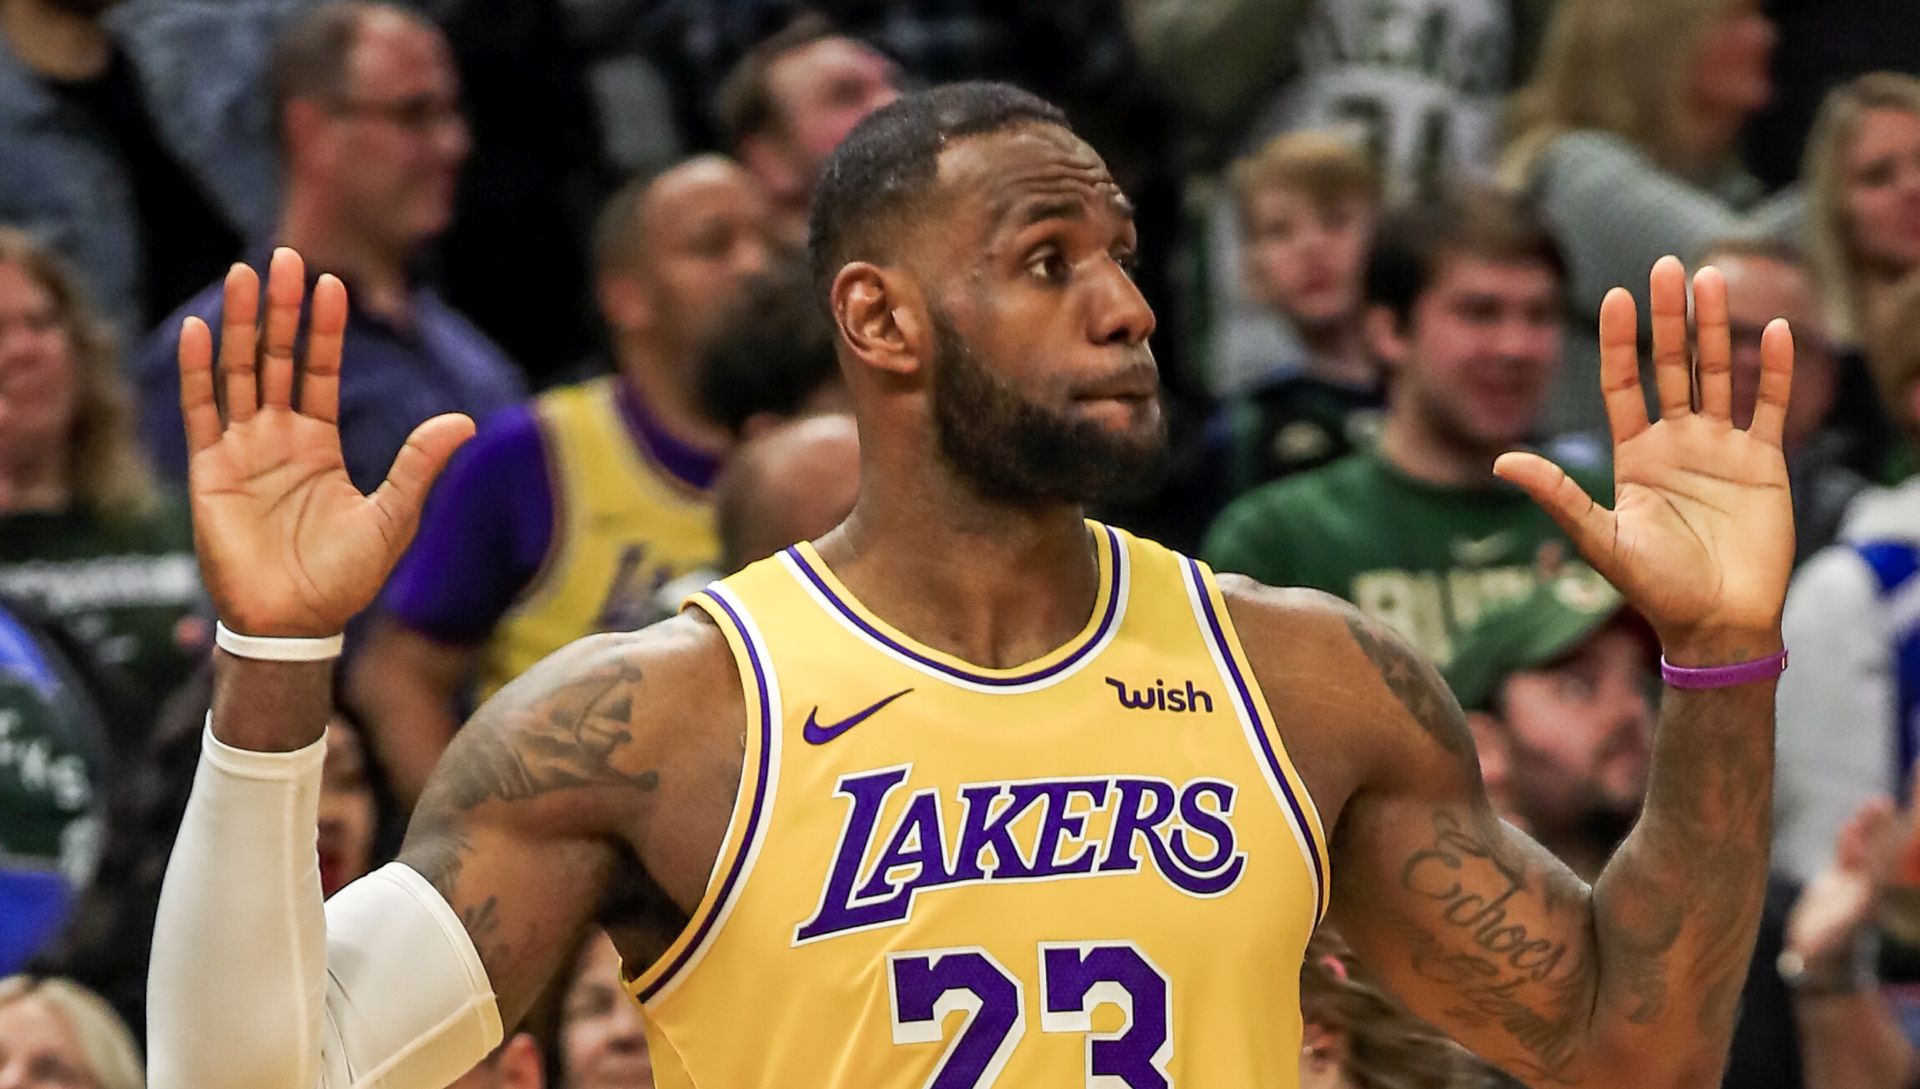 epa08082768 Los Angeles Lakers forward LeBron James reacts after being called for a foul during the NBA game between the Los Angeles Lakers and the Milwaukee Bucks at Fiserv Forum in Milwaukee, Wisconsin, USA, 19 December 2019.  EPA/TANNEN MAURY SHUTTERSTOCK OUT